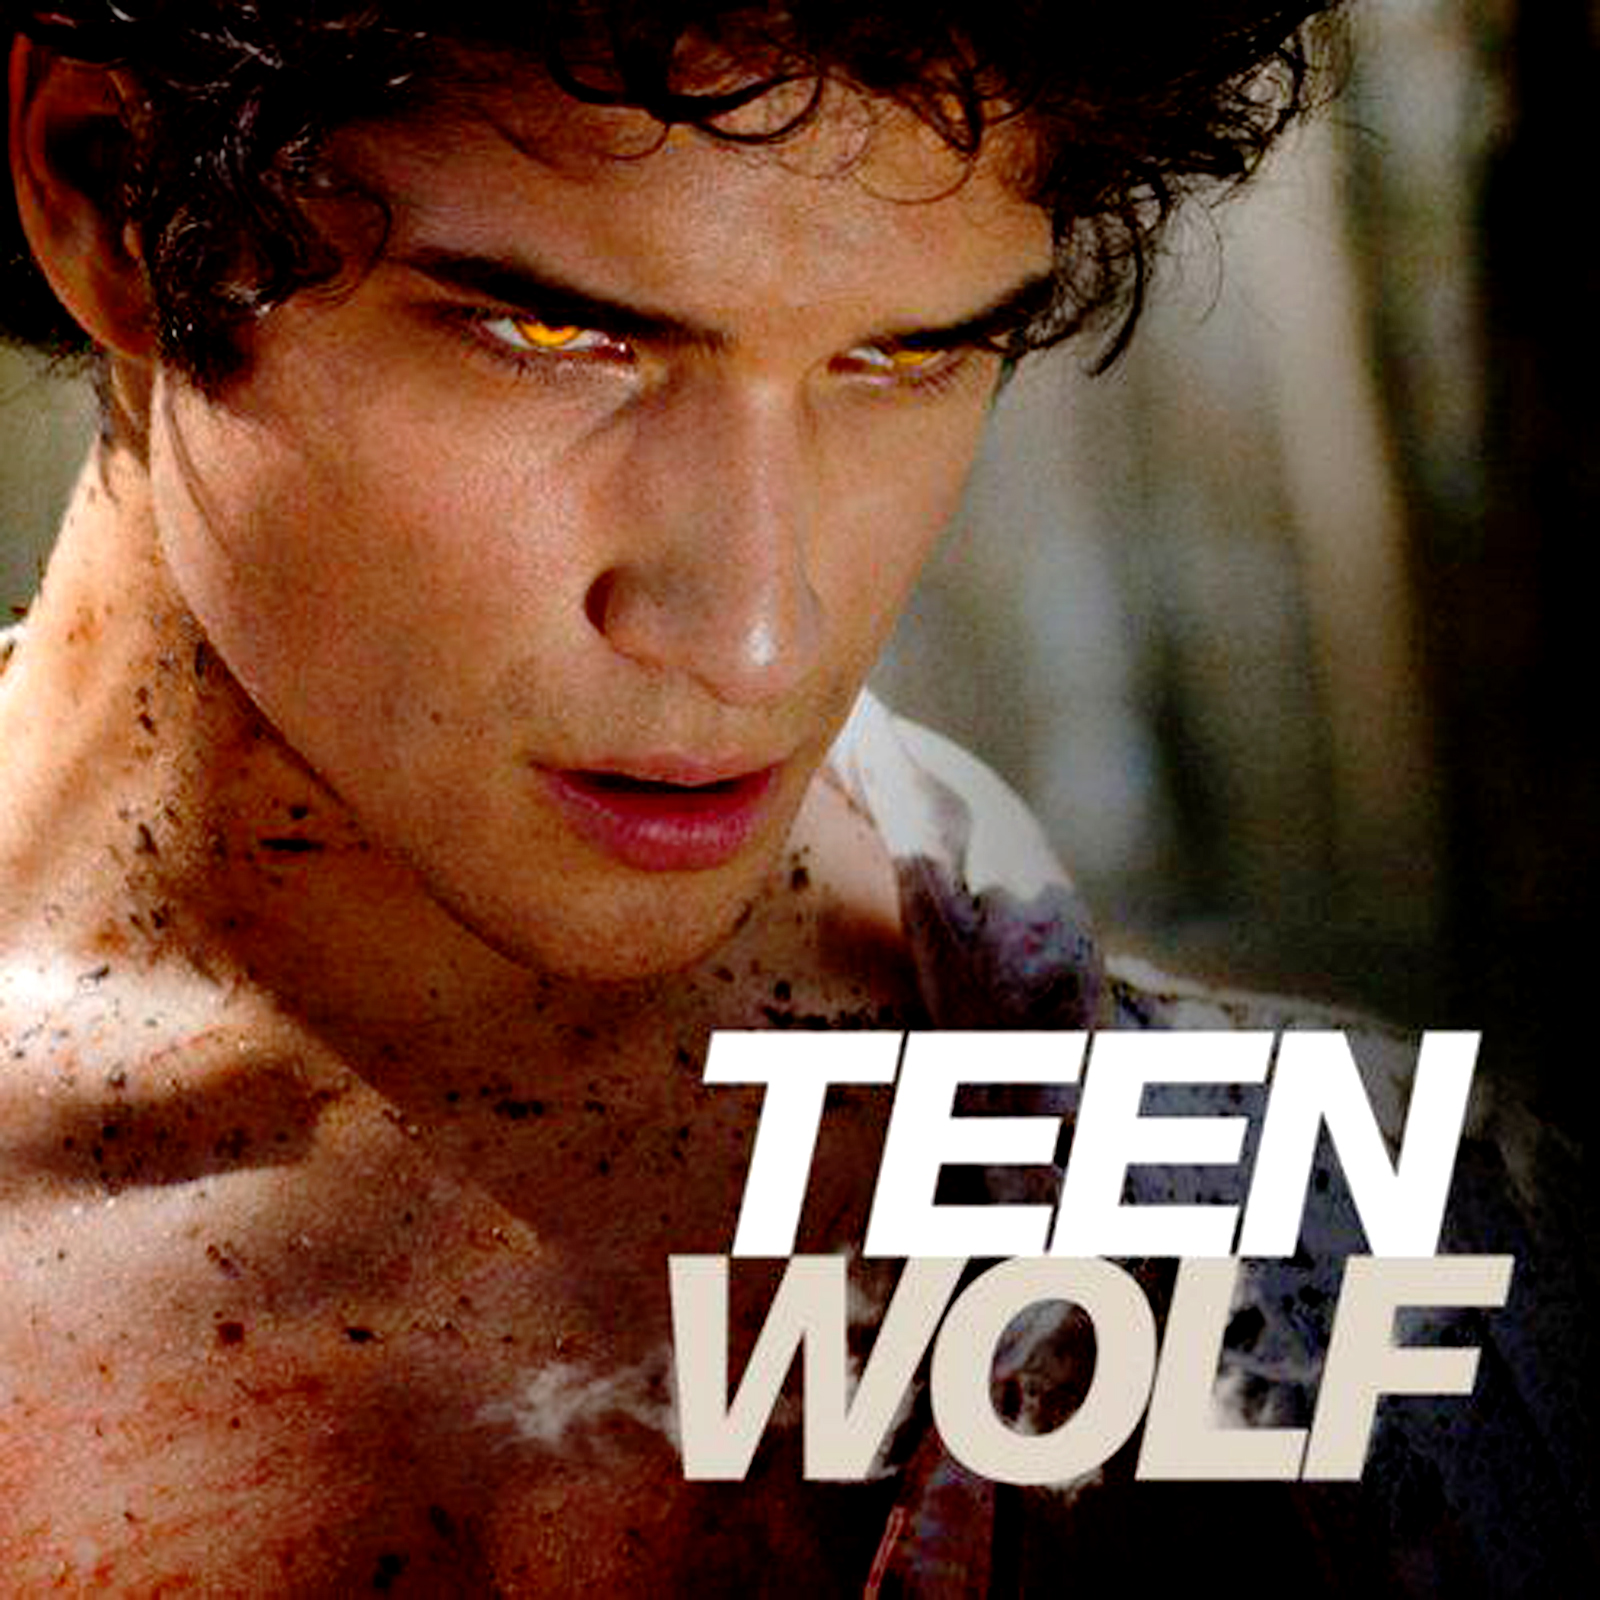 Teen Wolf Poster HD Wallpaper Image To